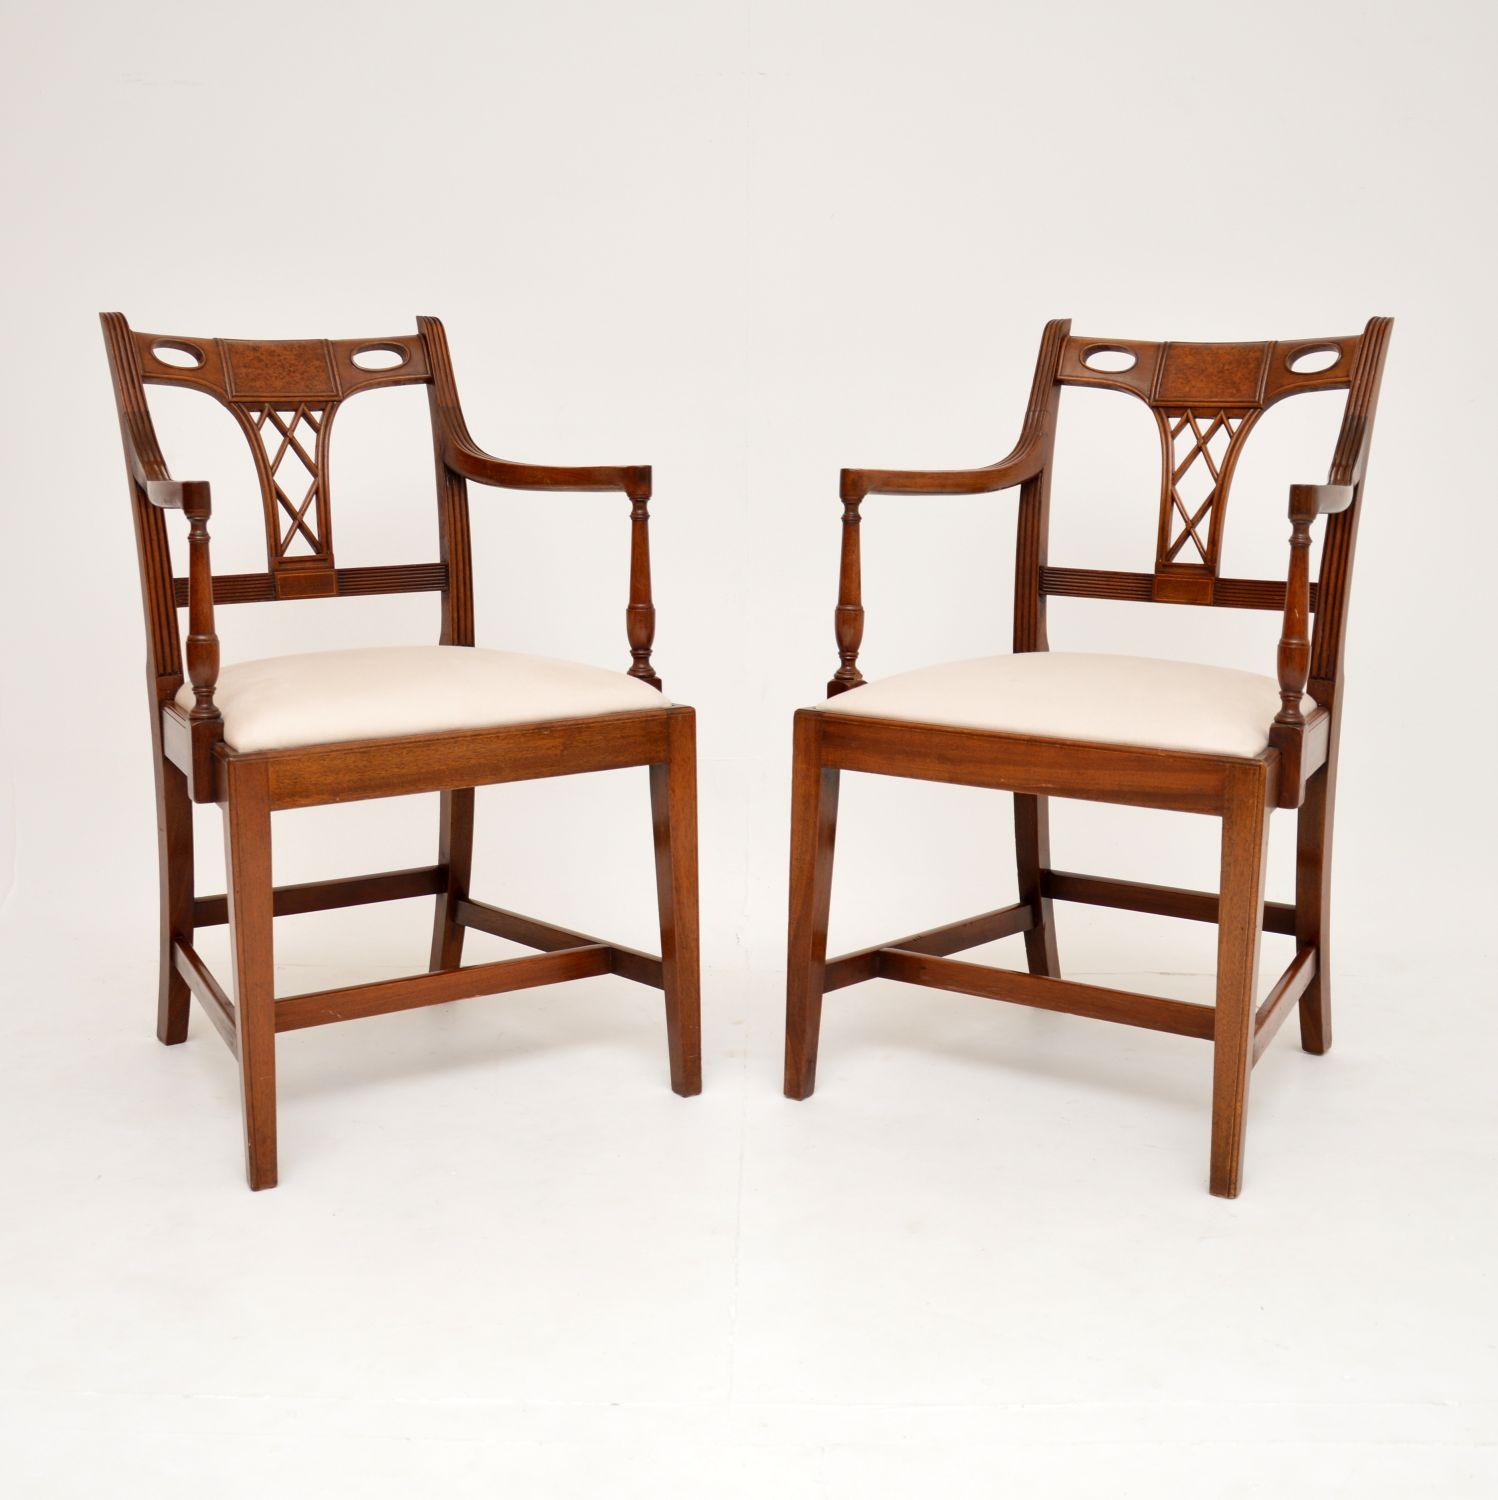 A beautiful and unusual pair of antique Georgian Style carver armchairs. They were made in England, and date from around 1920’s period.

The quality is outstanding, they are predominantly solid wood, with inset panels of burr walnut in the back